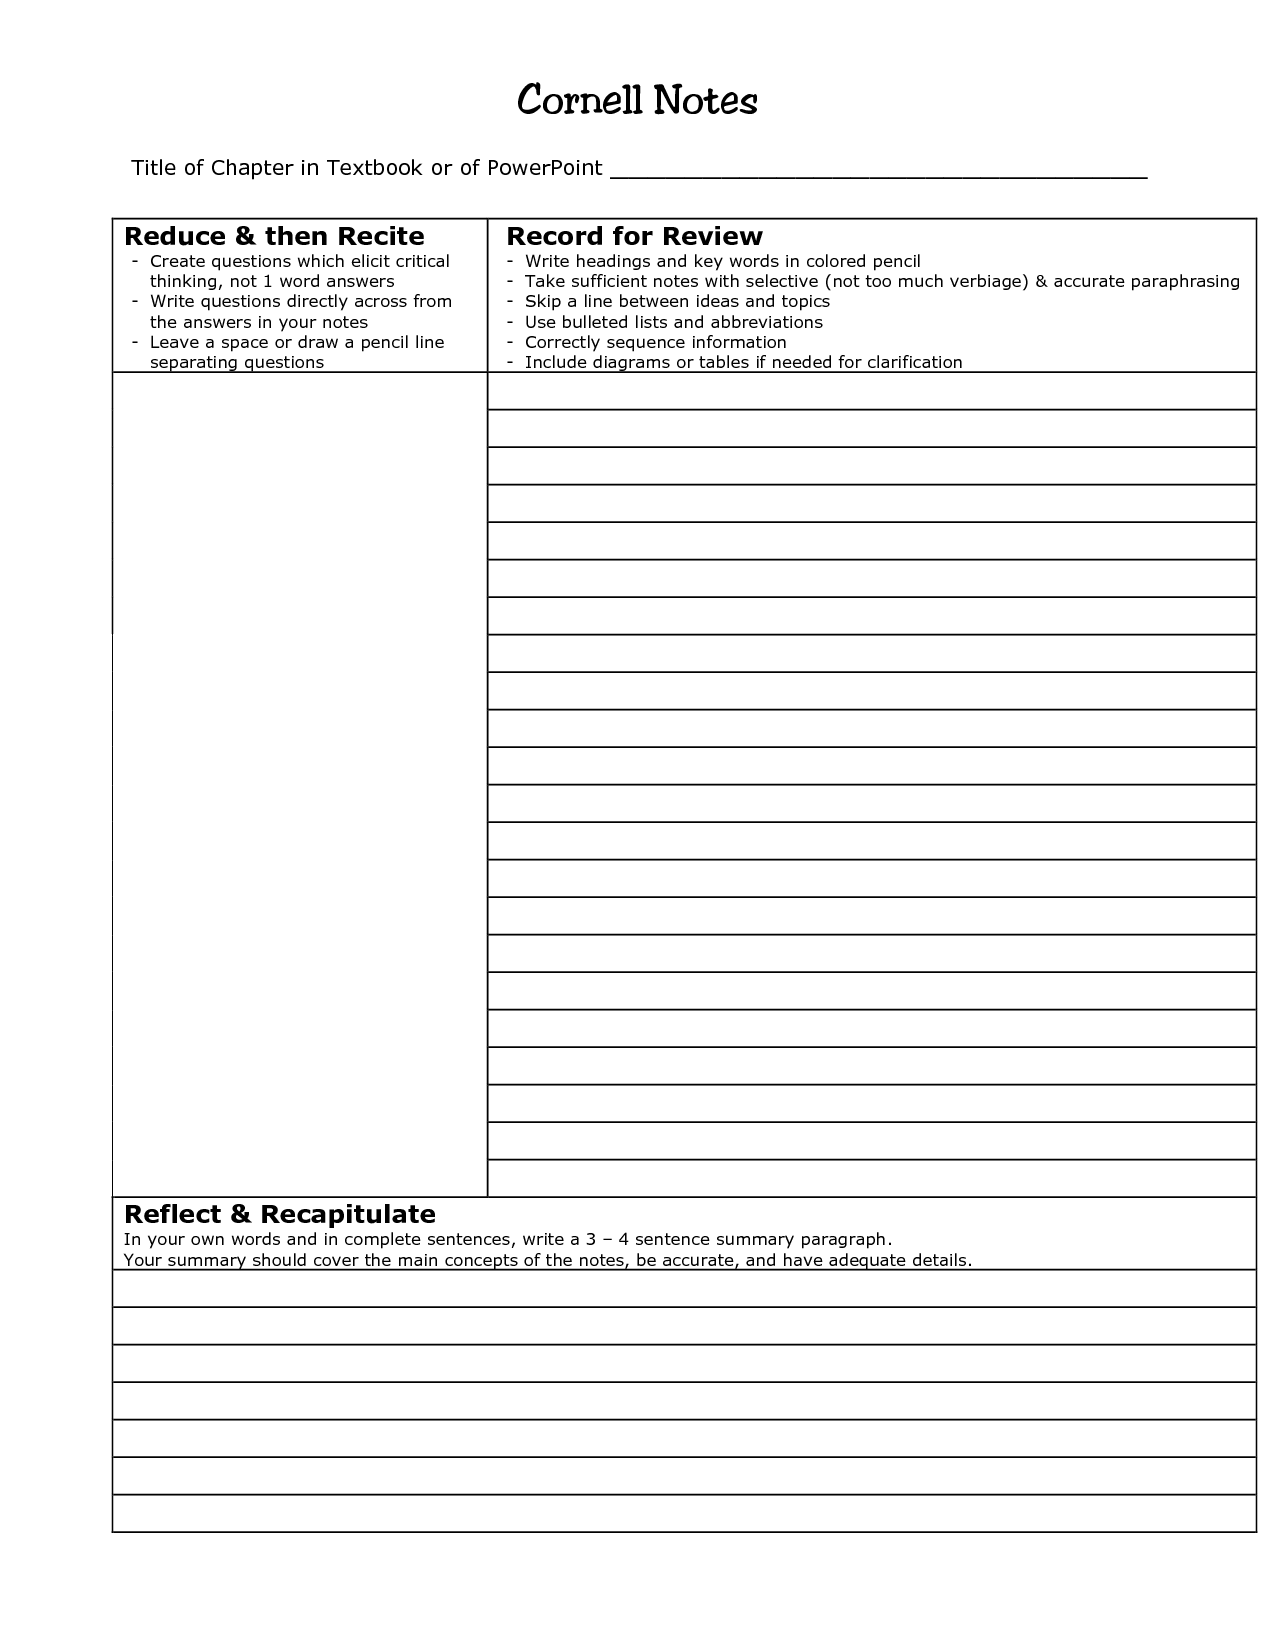 8-best-images-of-note-template-pdf-printable-cornell-notes-template